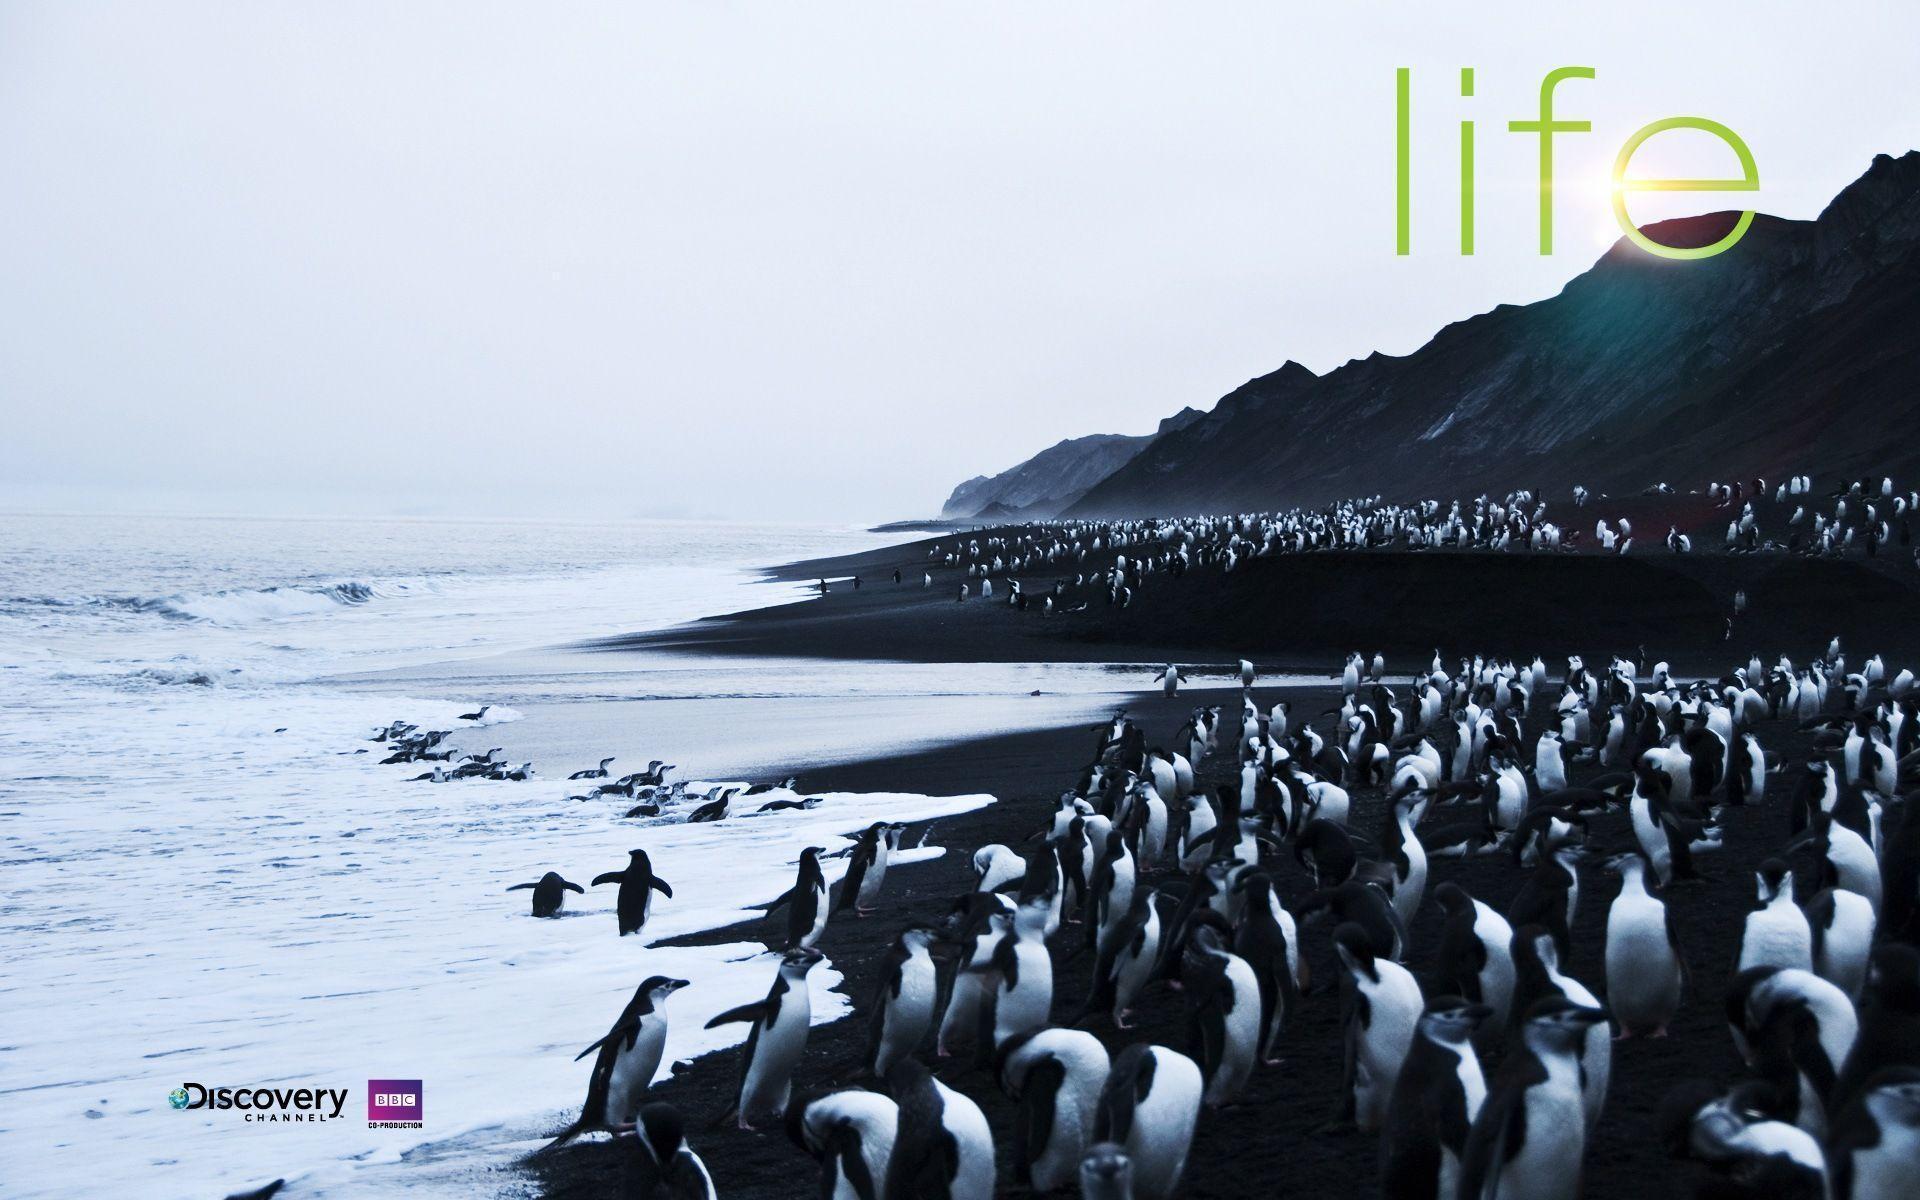 Download Discovery Channel LIFE Theme And Wallpaper For Windows 7